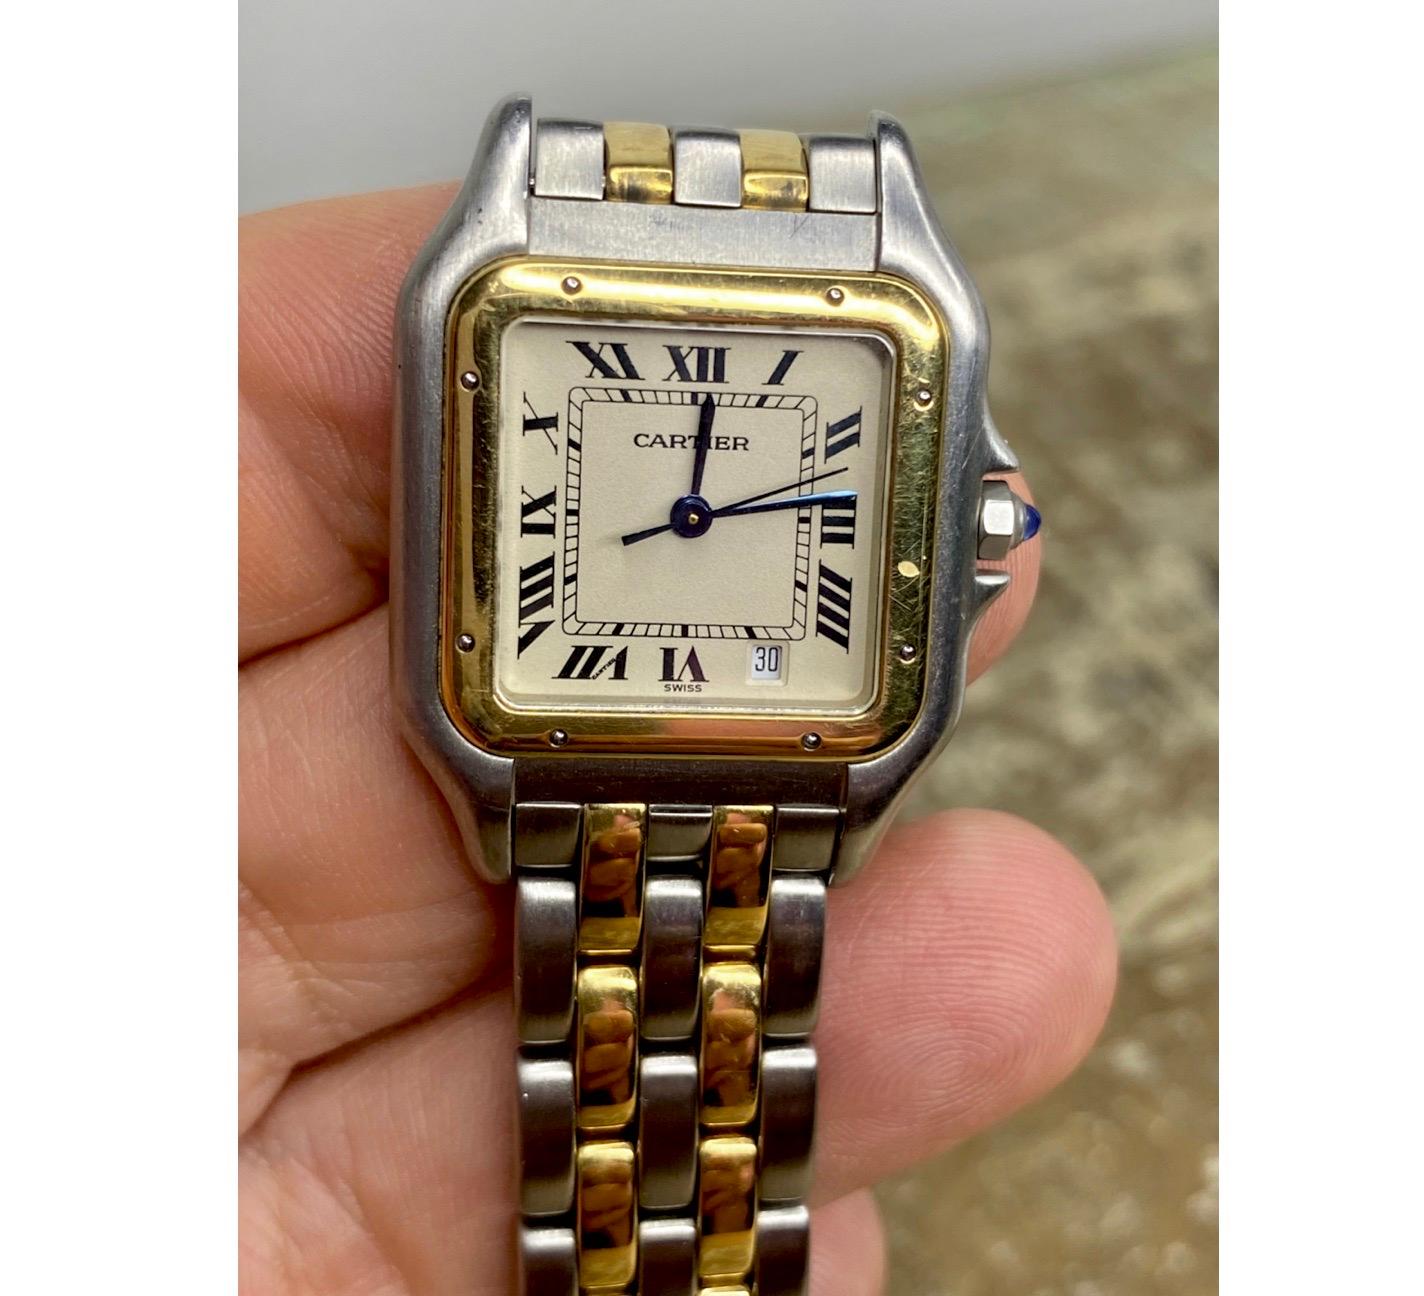 
Cartier Phantere
Midsize Ladies Watch. 
27mm stainless steel case with two-row 18K yellow gold bezel.
Off-White dial with blue steel hands and black Roman numerals hour markers. 
Date display at the 5 o'clock position. 
Two-tone stainless steel and